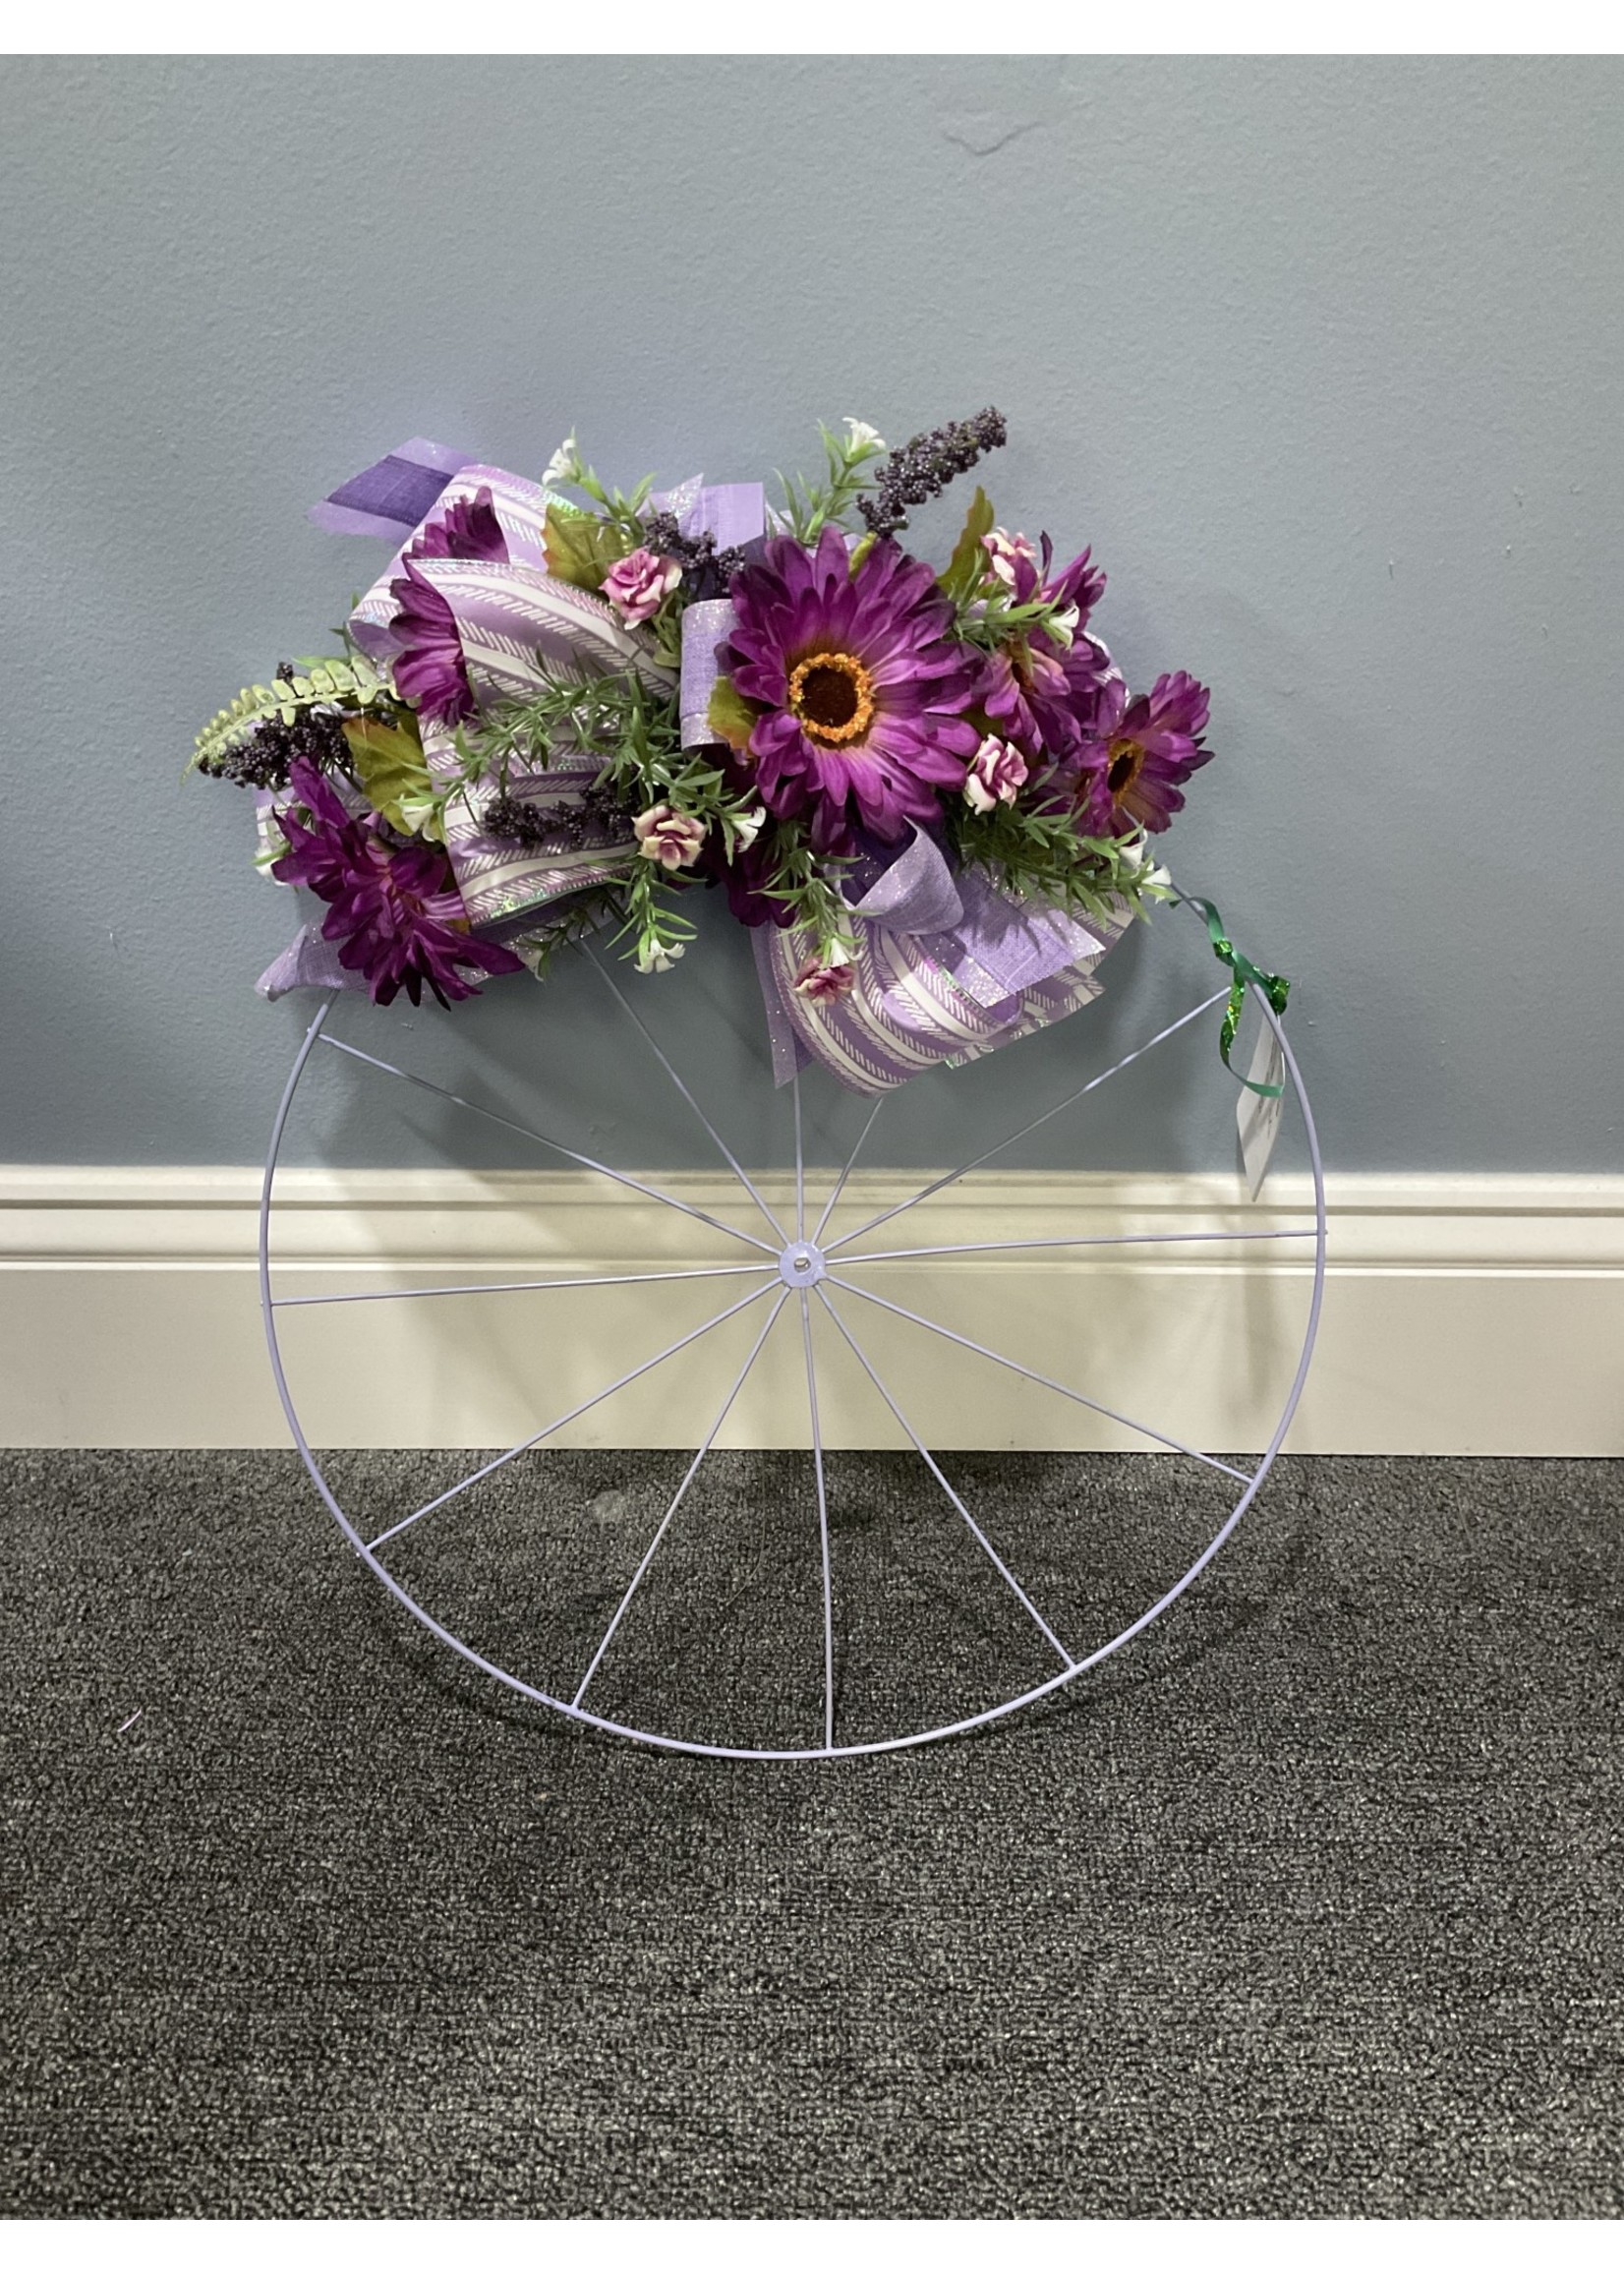 My New Favorite Thing Wreath Bicycle 18 in-Purple w/Purple Flowers and Purple Stripe Ribbon